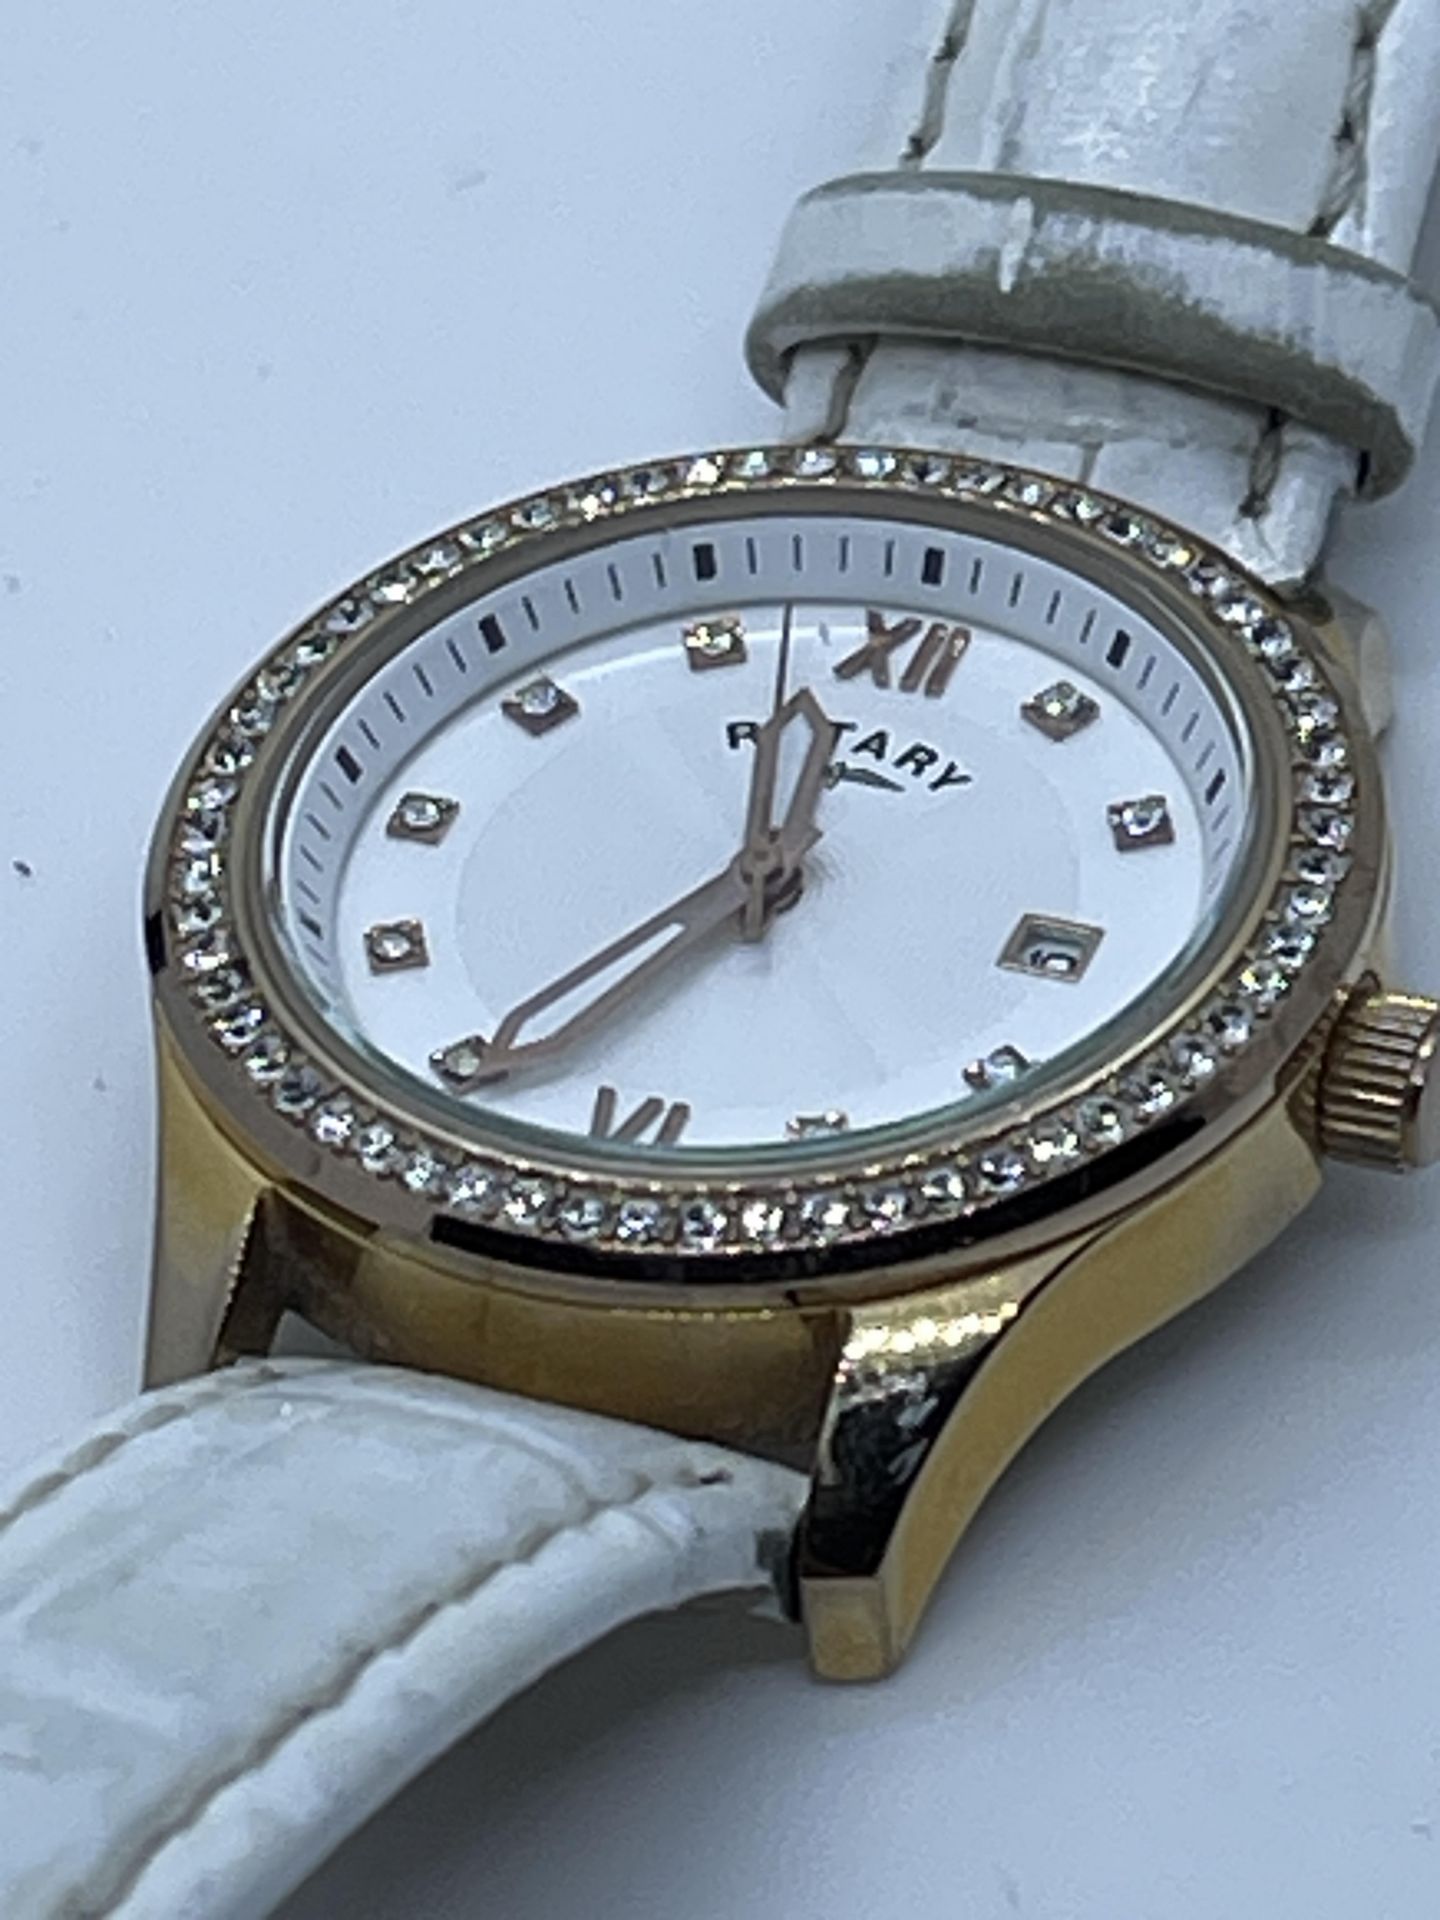 Rotary watch return/spares/lost property from a private jet charter with no reserve